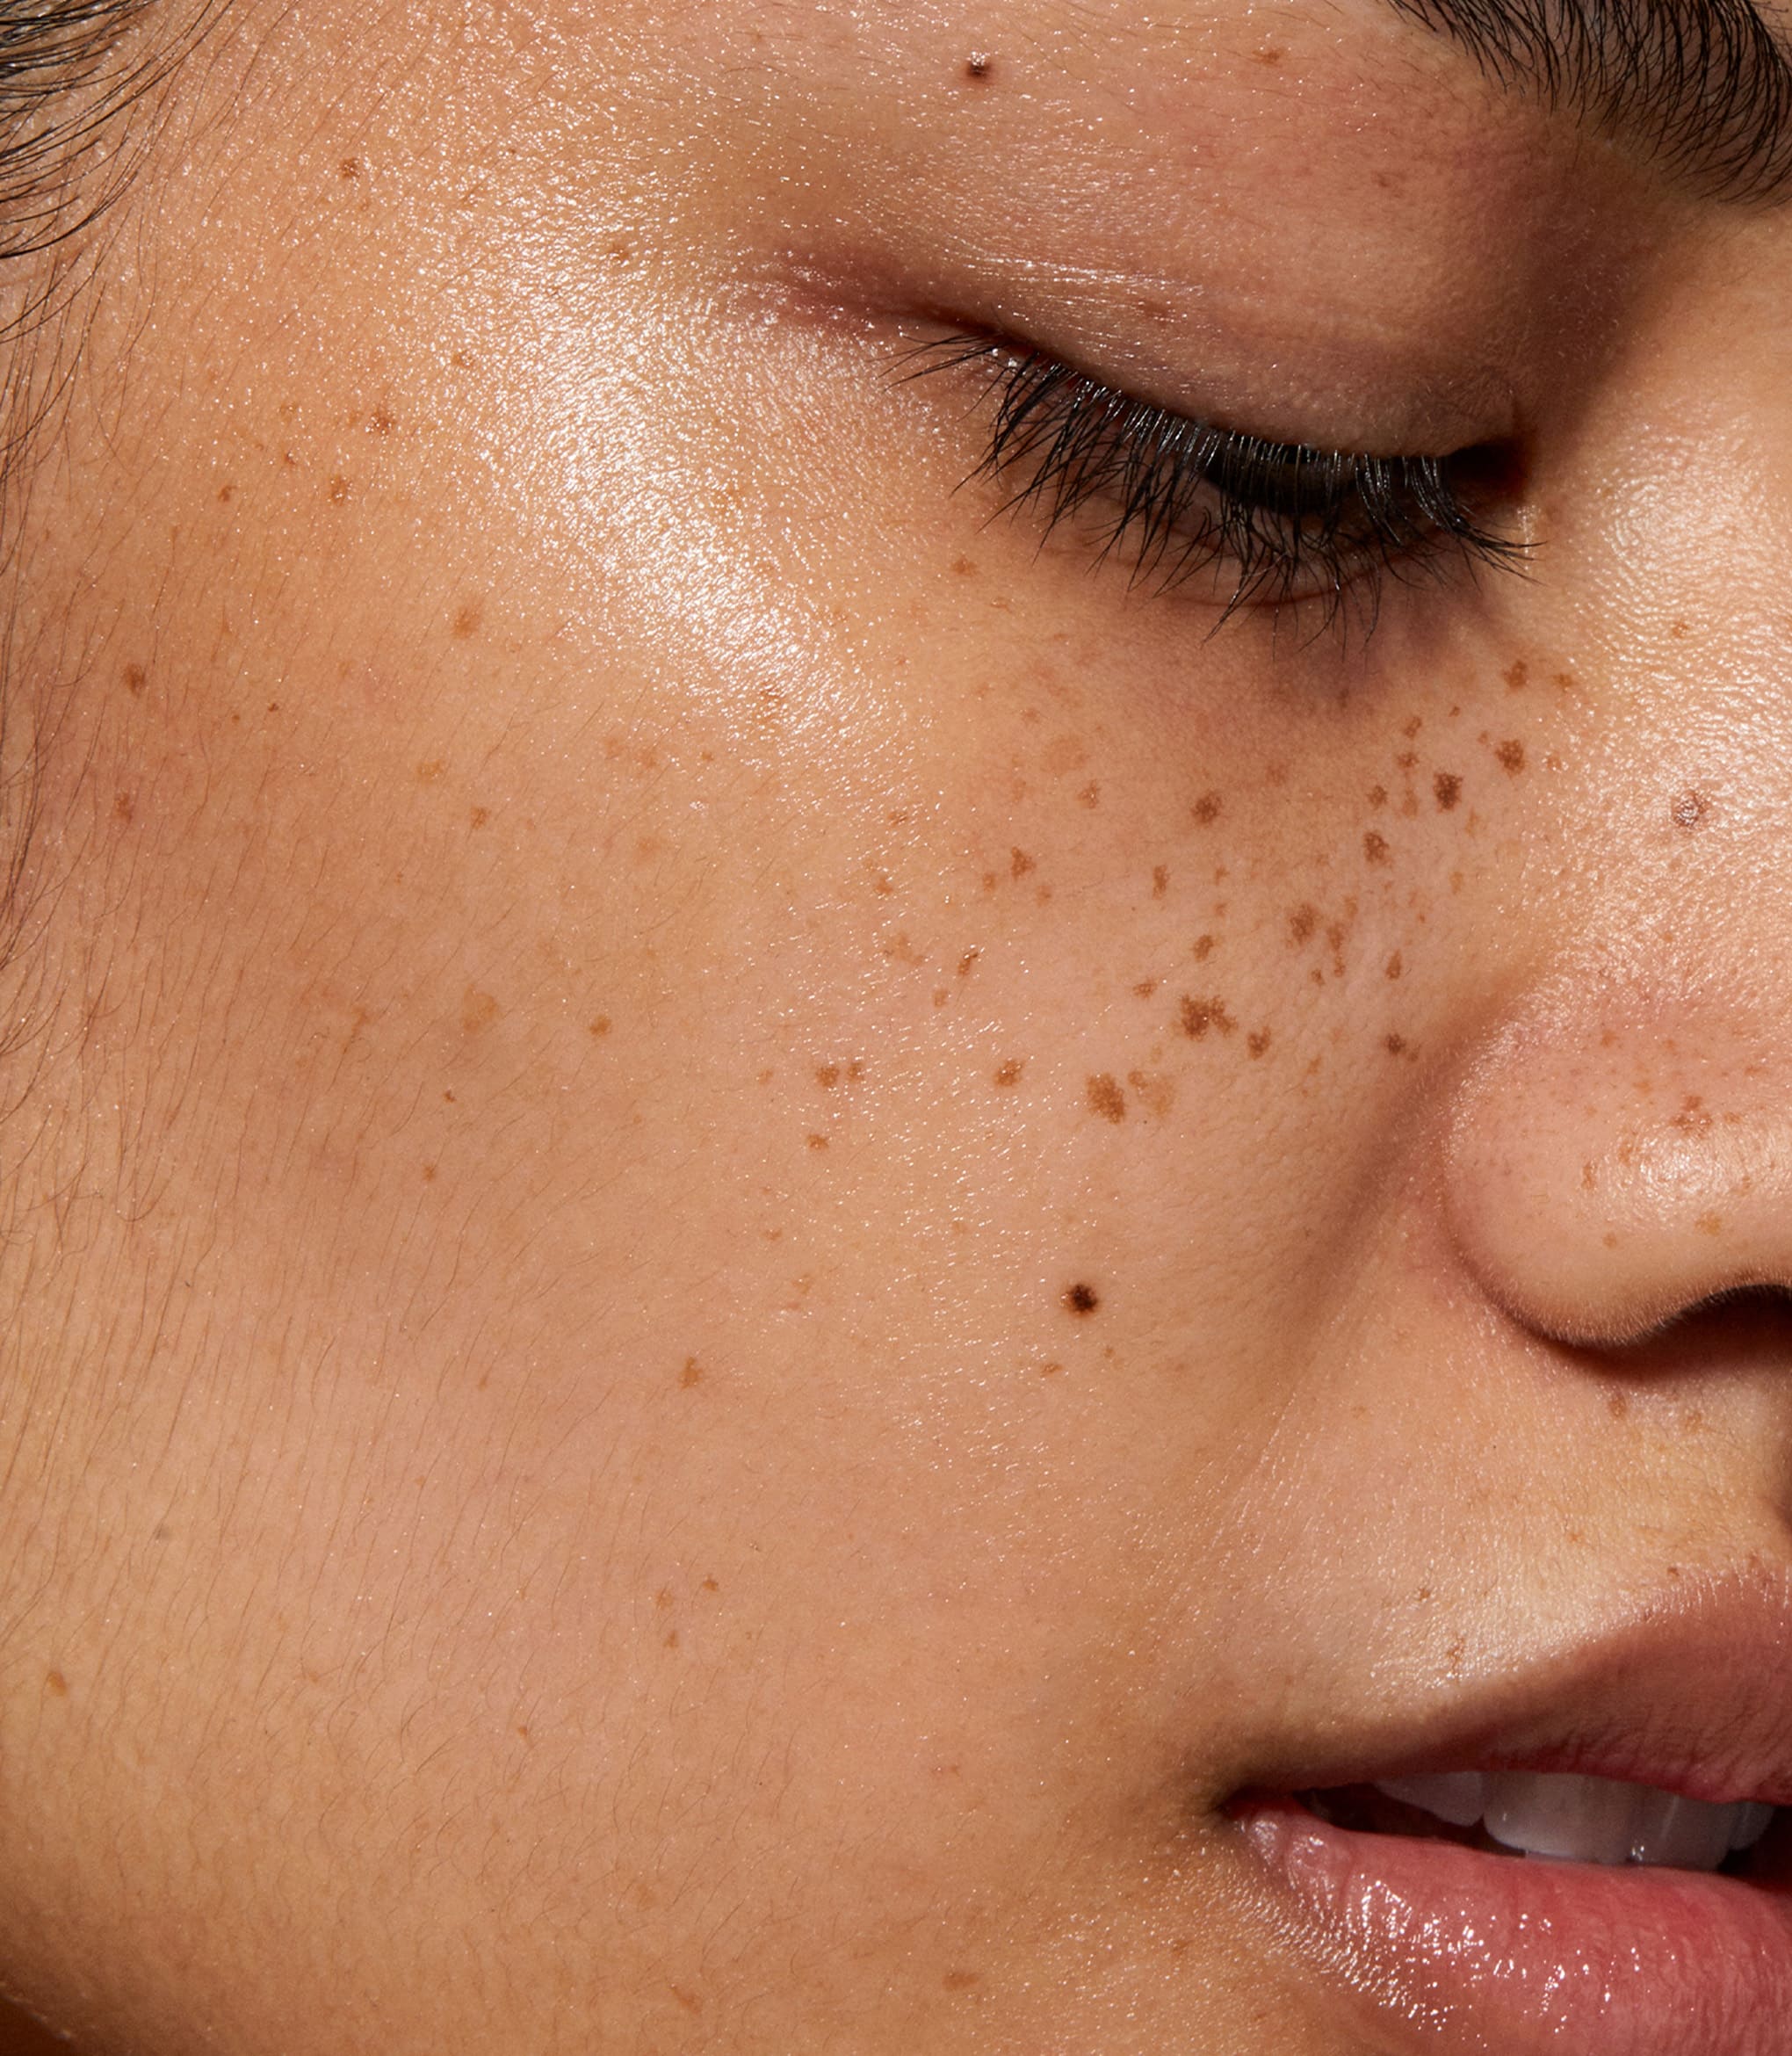 A close up of model's face with Mineral UV Shield SPF 30 applied to her skin.